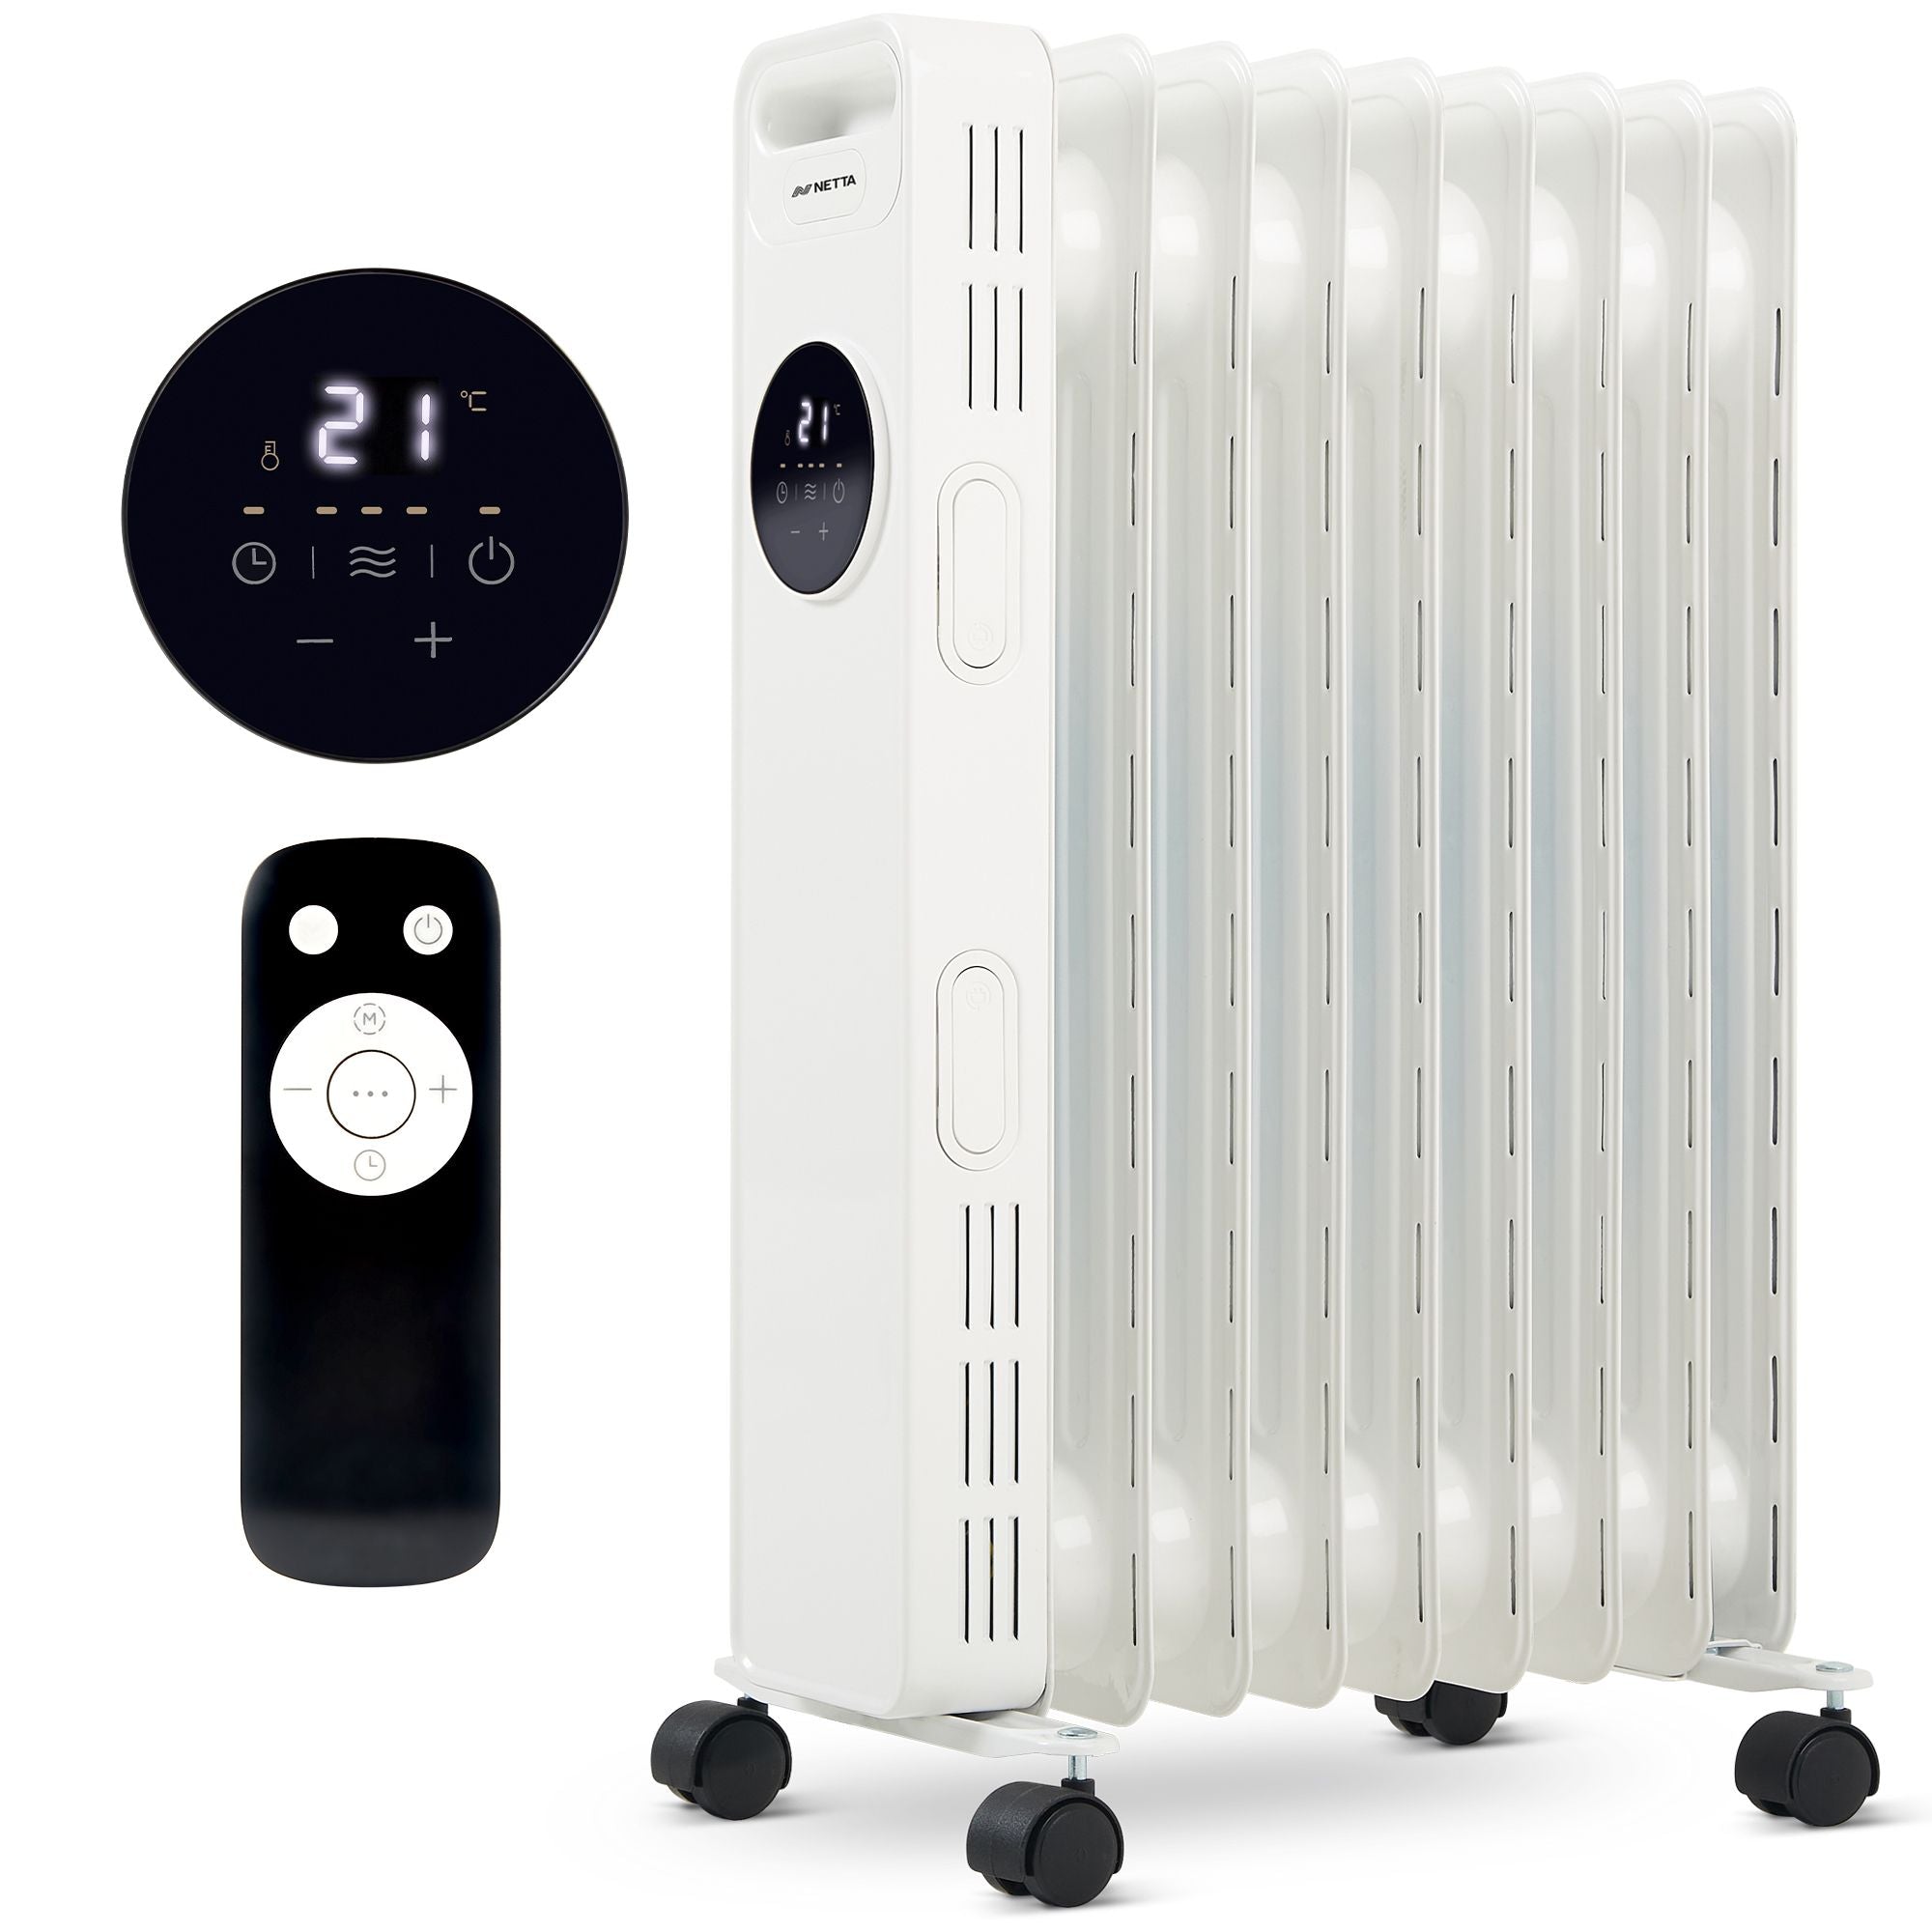 2000W 9 Fin Oil Filled Radiator with Timer & Remote Control - White